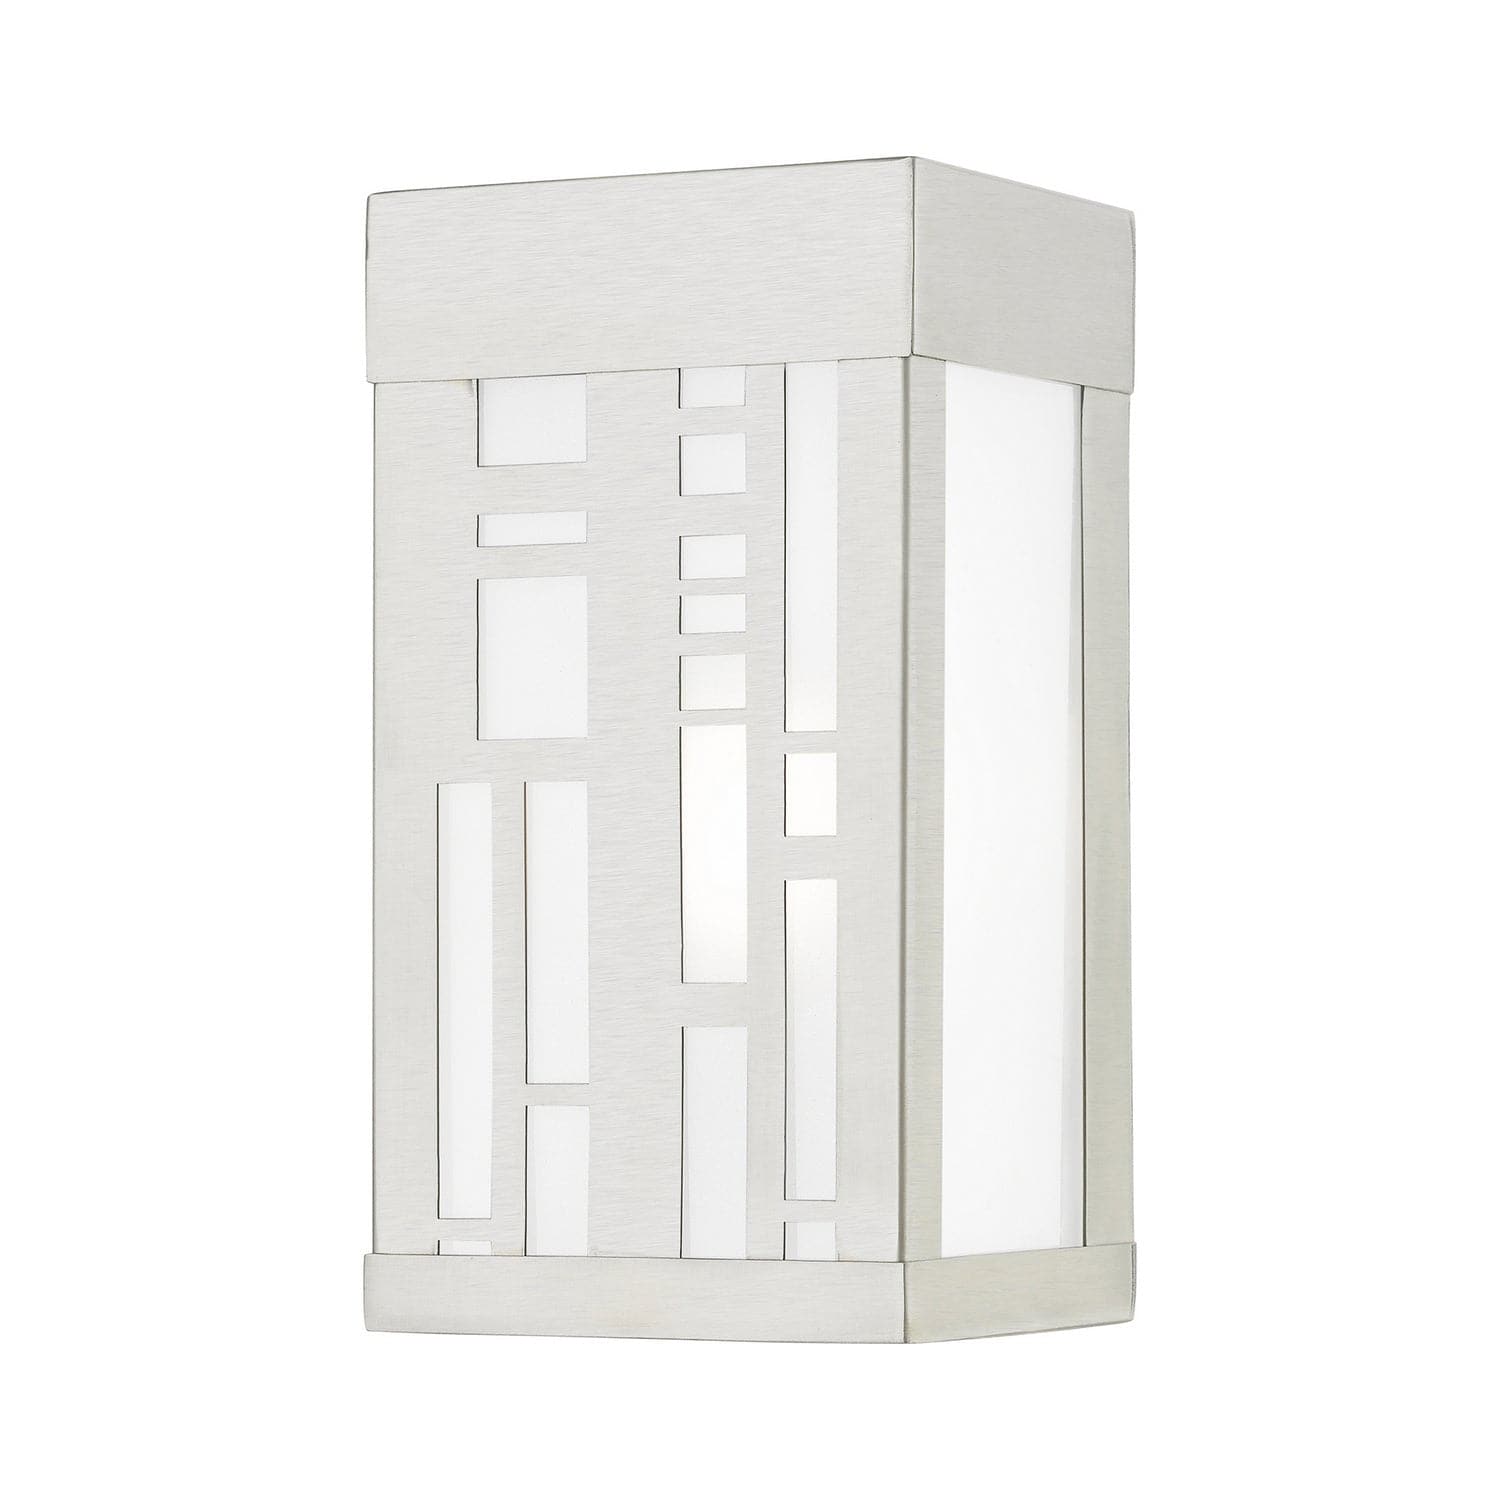 Livex Lighting - 22971-91 - One Light Outdoor Wall Sconce - Malmo - Brushed Nickel